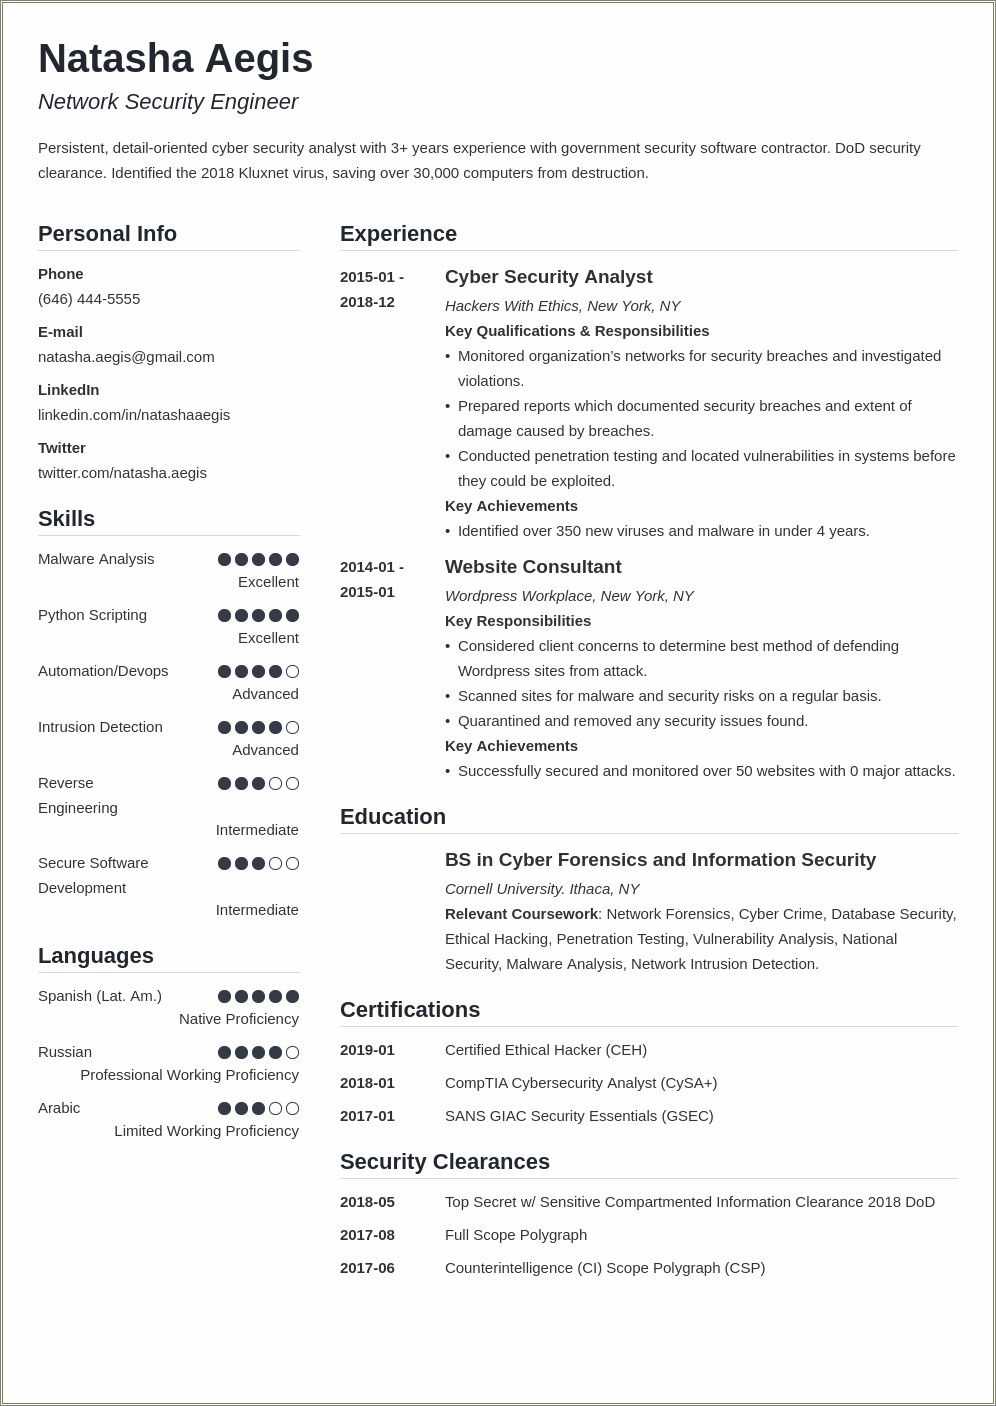 Resume Objective For Entry Level Cyber Security